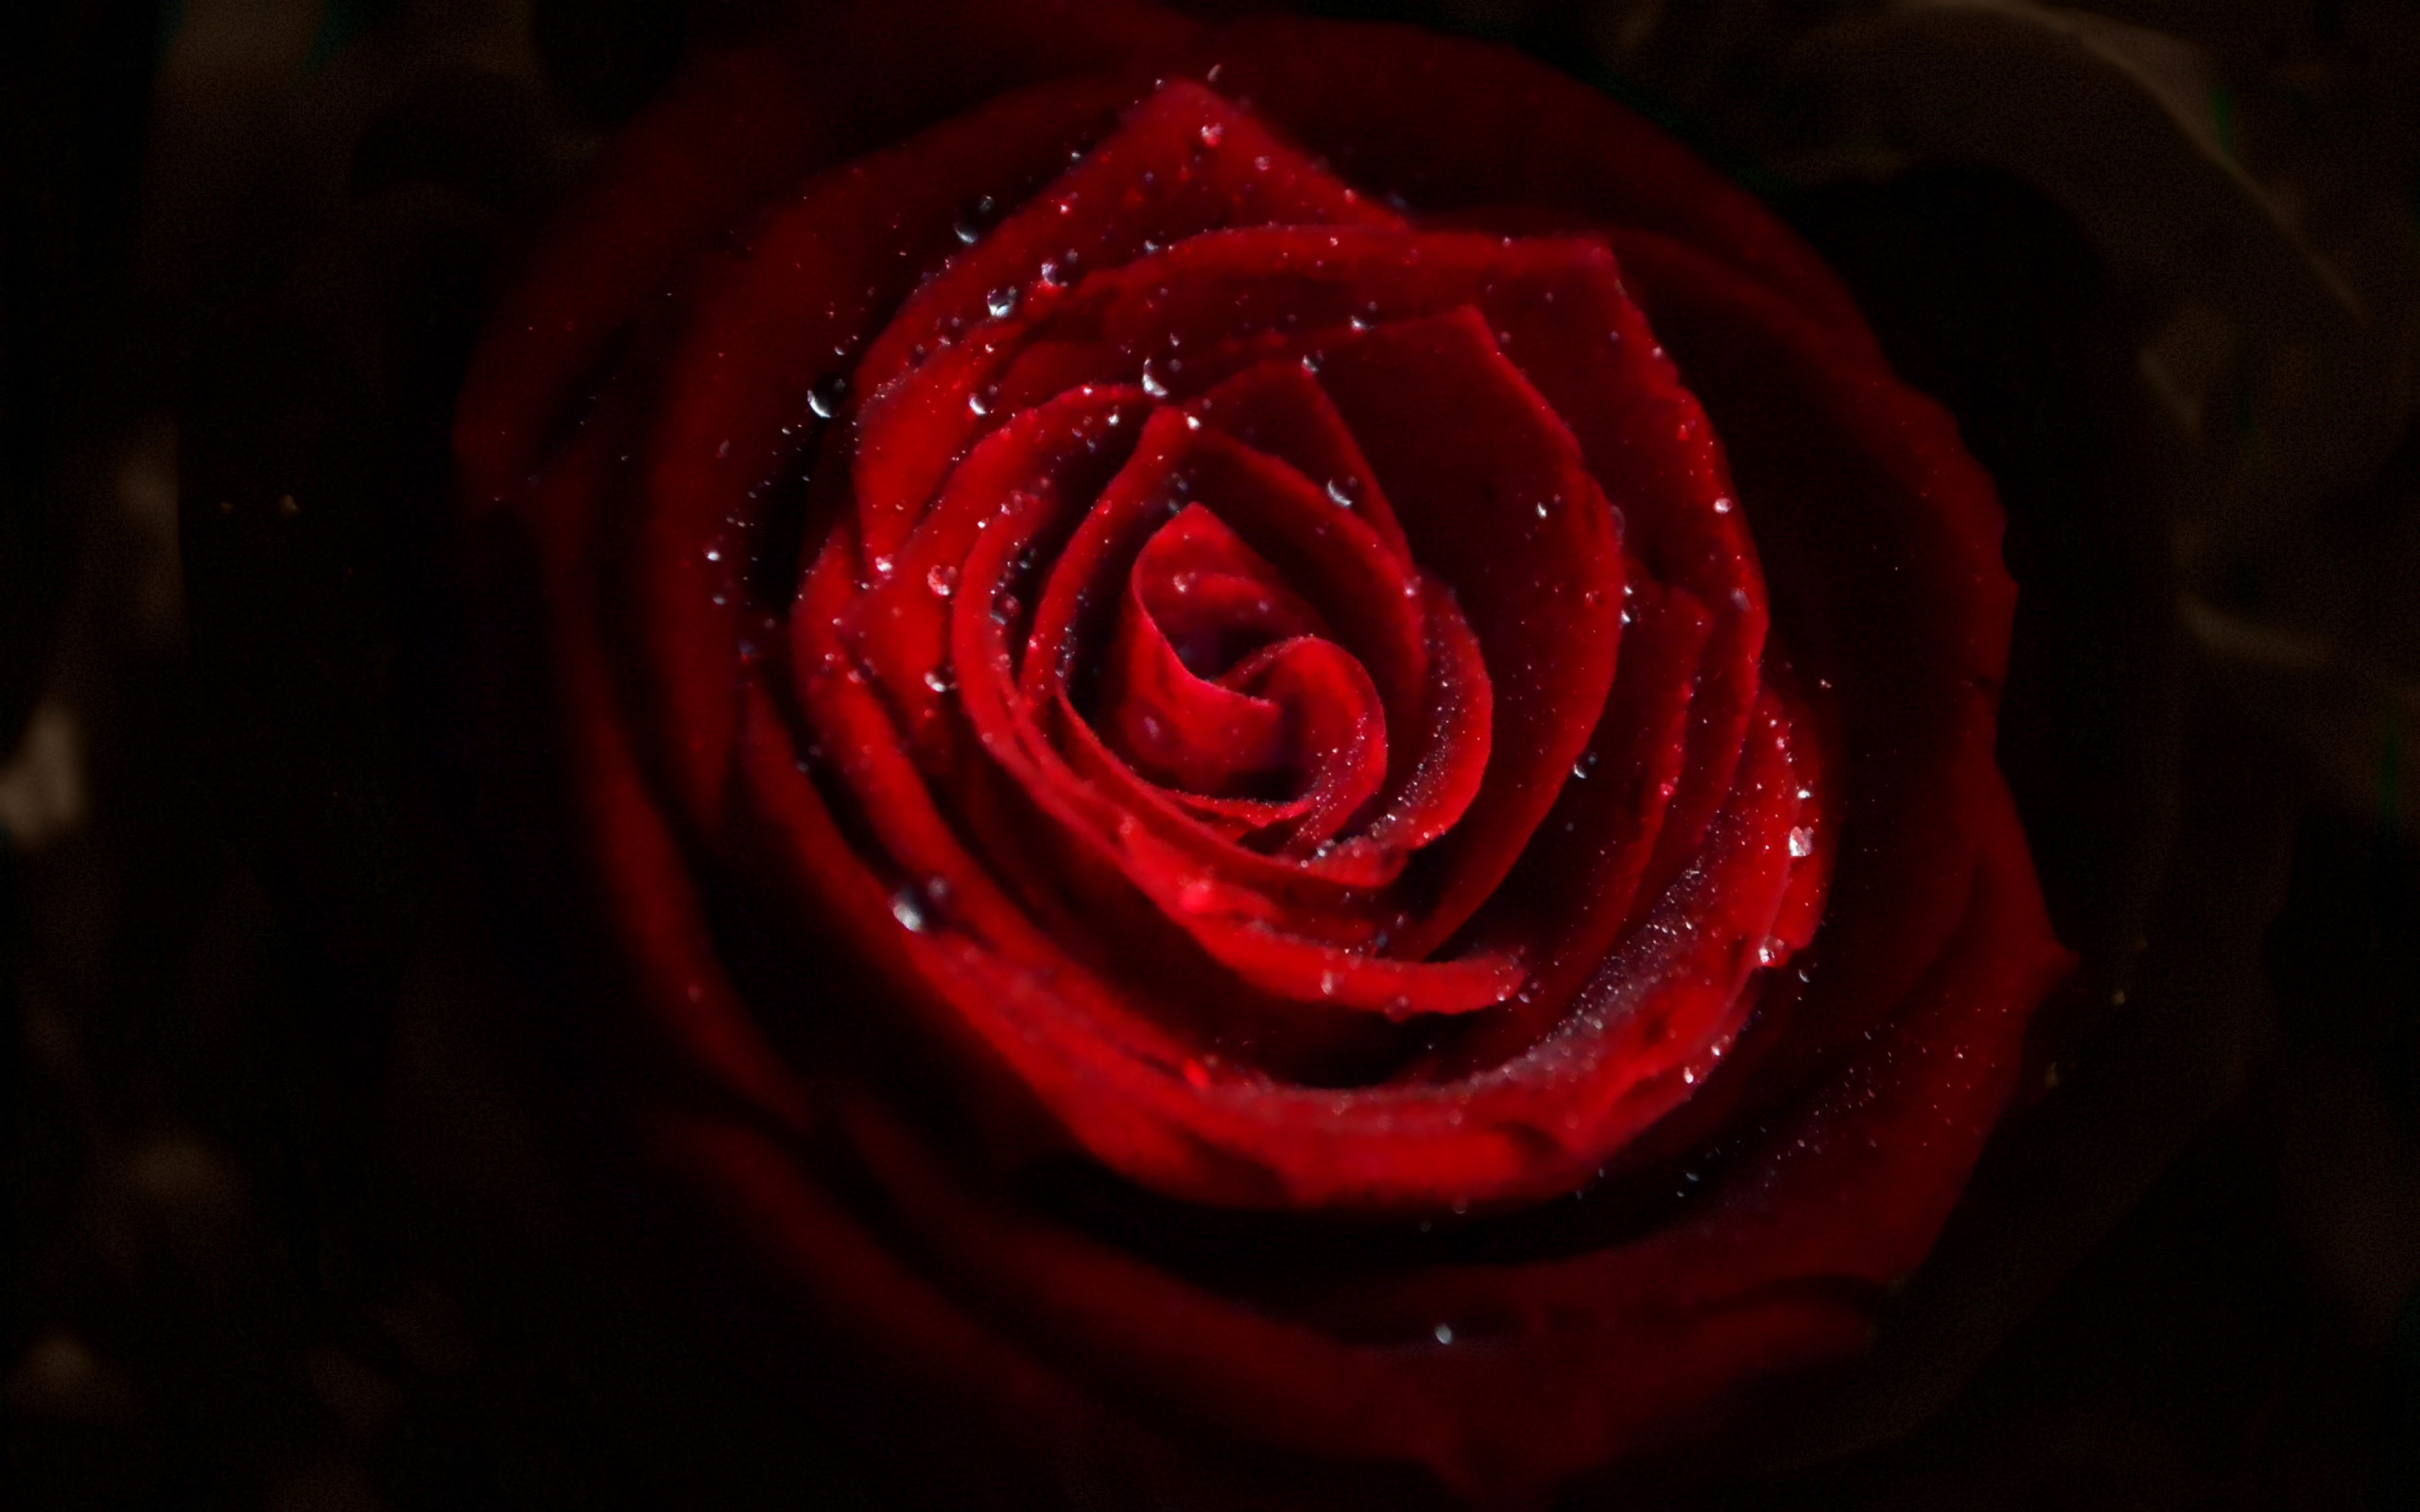 Water drops on red rose wallpaper 2560x1600